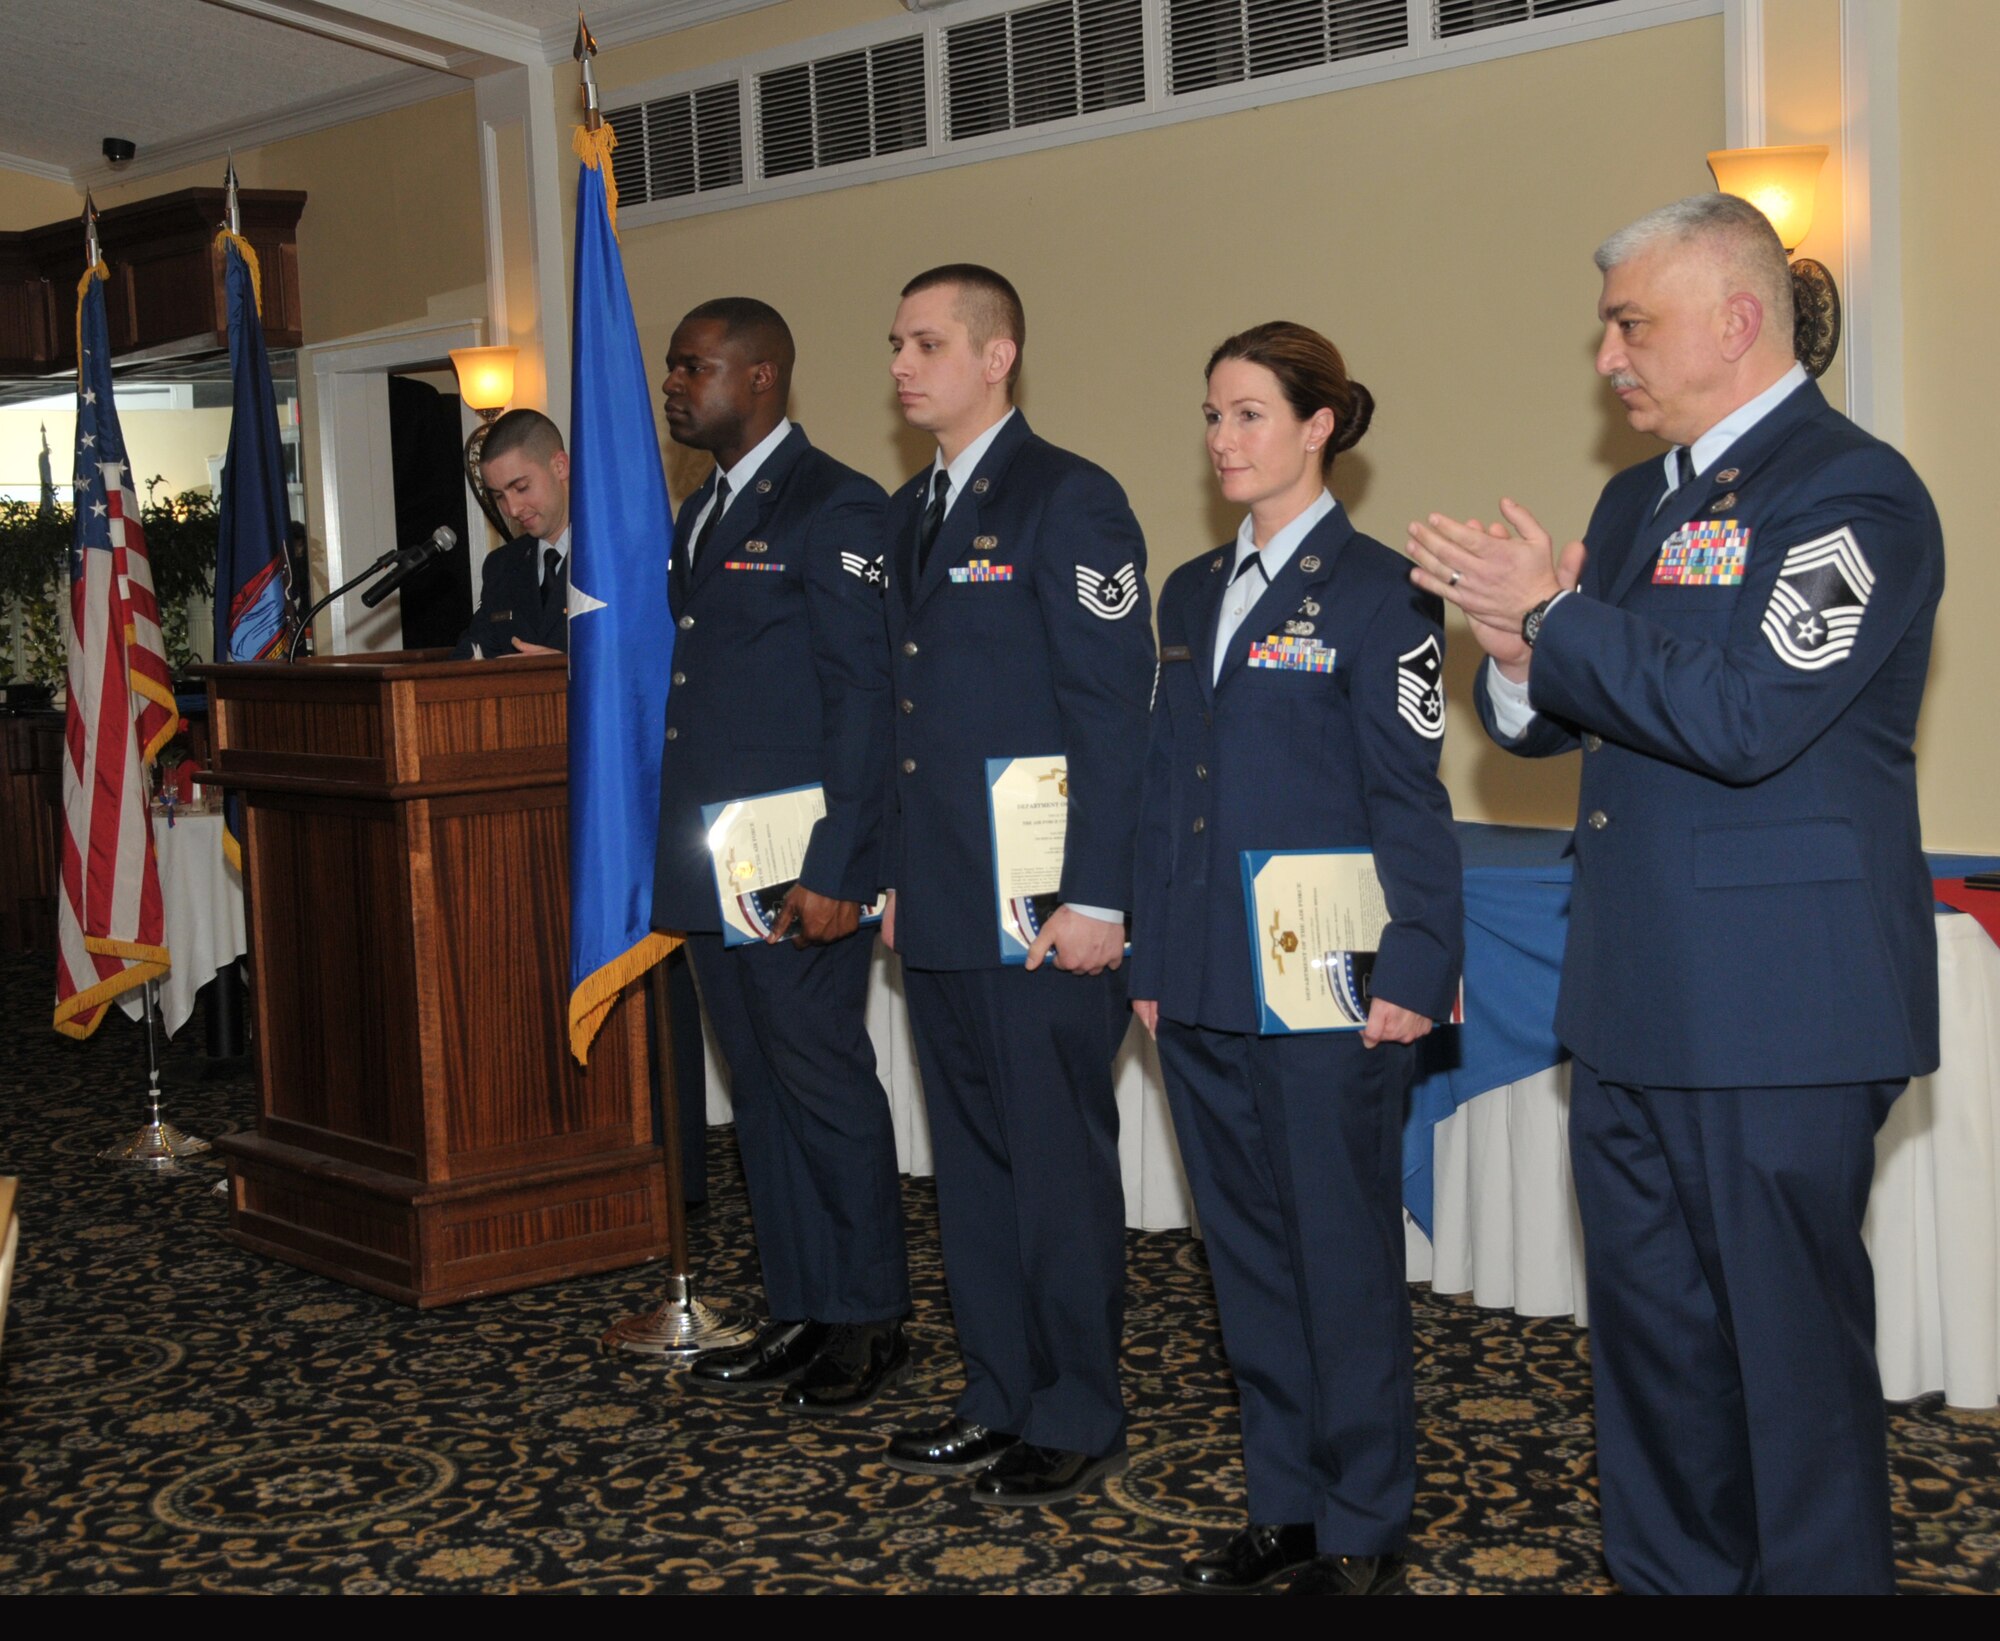 SCOTIA, N.Y. -- Senior Airman Kylief Tucker, Airman of the Year, Tech. Sgt. Robert Harrington, NCO of the Year, and Master Sgt. Amanda Blodgett, First Sergeant of the Year, were all honored during the 109th Airlift Wing's annual Airmen of the Year Dinner on April 4. Chief Master Sgt. Mark Mann (right) accepted the award for Senior Master Sgt. Patrick FitzGerald (not pictured), Senior NCO of the Year. Tucker is assigned to the 109th Maintenance Squadron, Harrington is assigned to the 109th Communications Flight, Blodgett is assigned to the 109th Logistics Readiness Squadron, and FitzGerald is assigned to the 109th Small Air Terminal. (Air National Guard photo by Master Sgt. William Gizara/Released) 